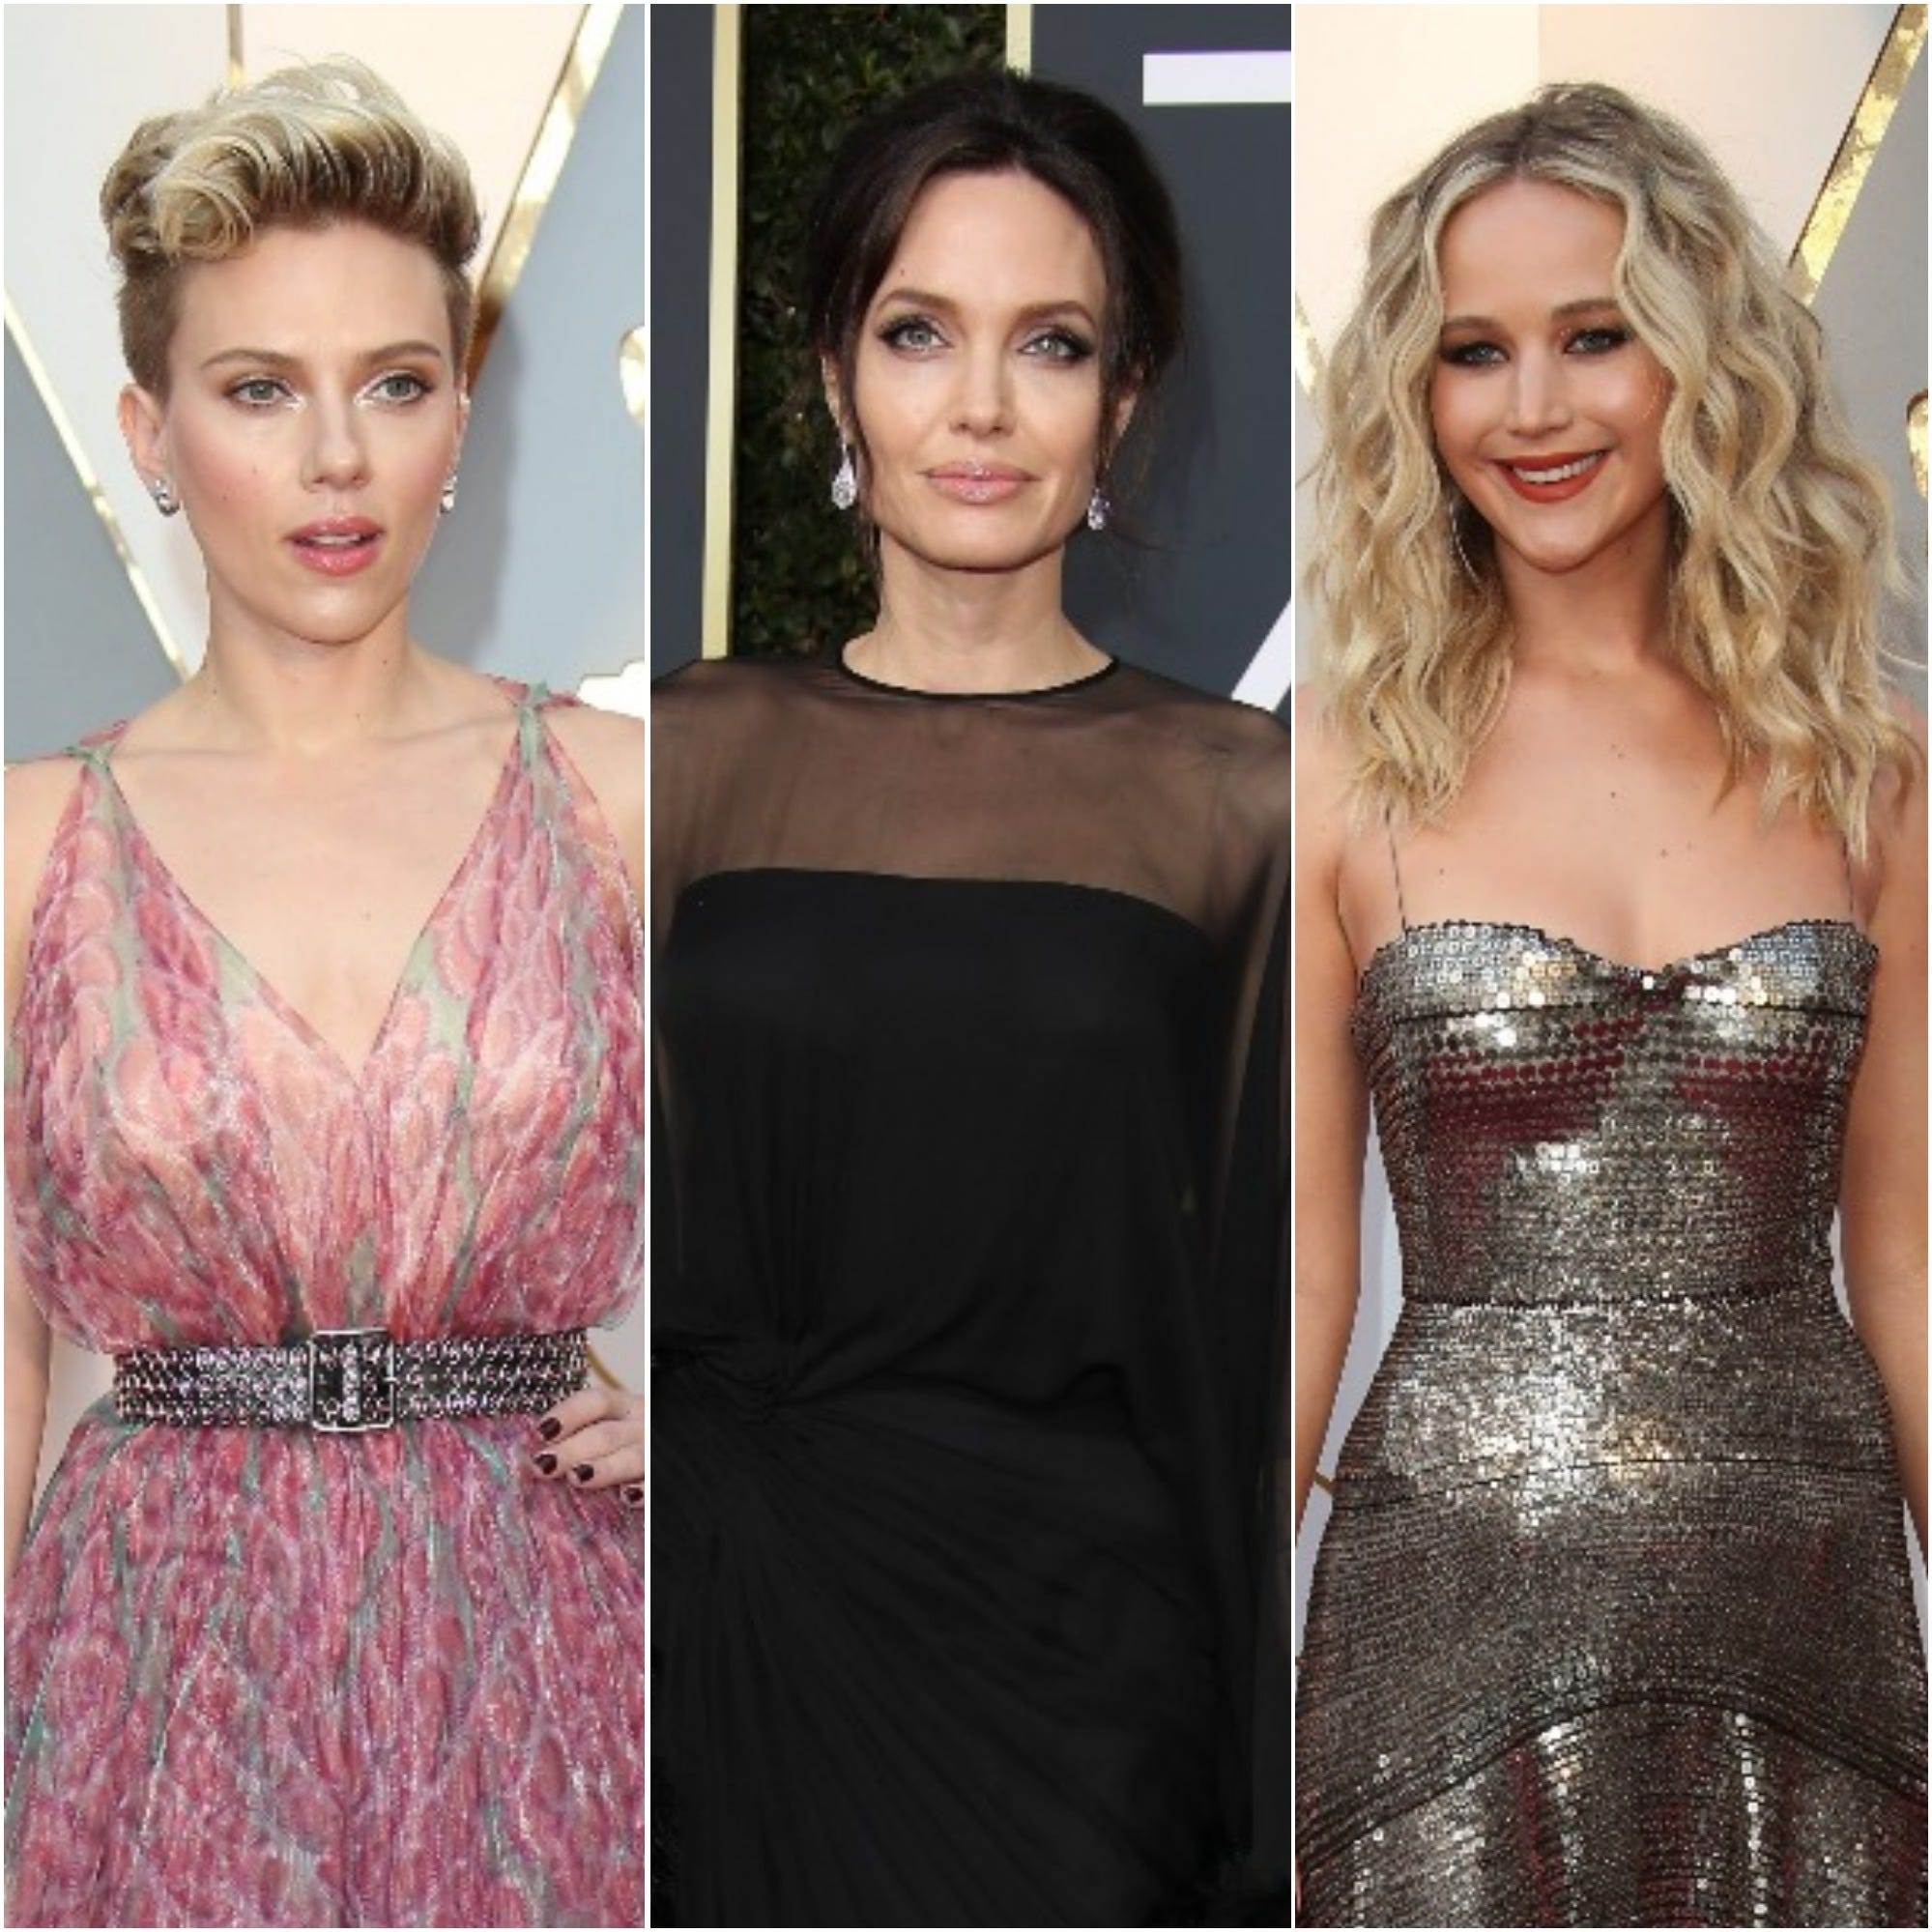 Scarlett Johansson, Angelina Jolie and Jennifer Lawrence top the list of Forbes' best-paid actresses in the world.